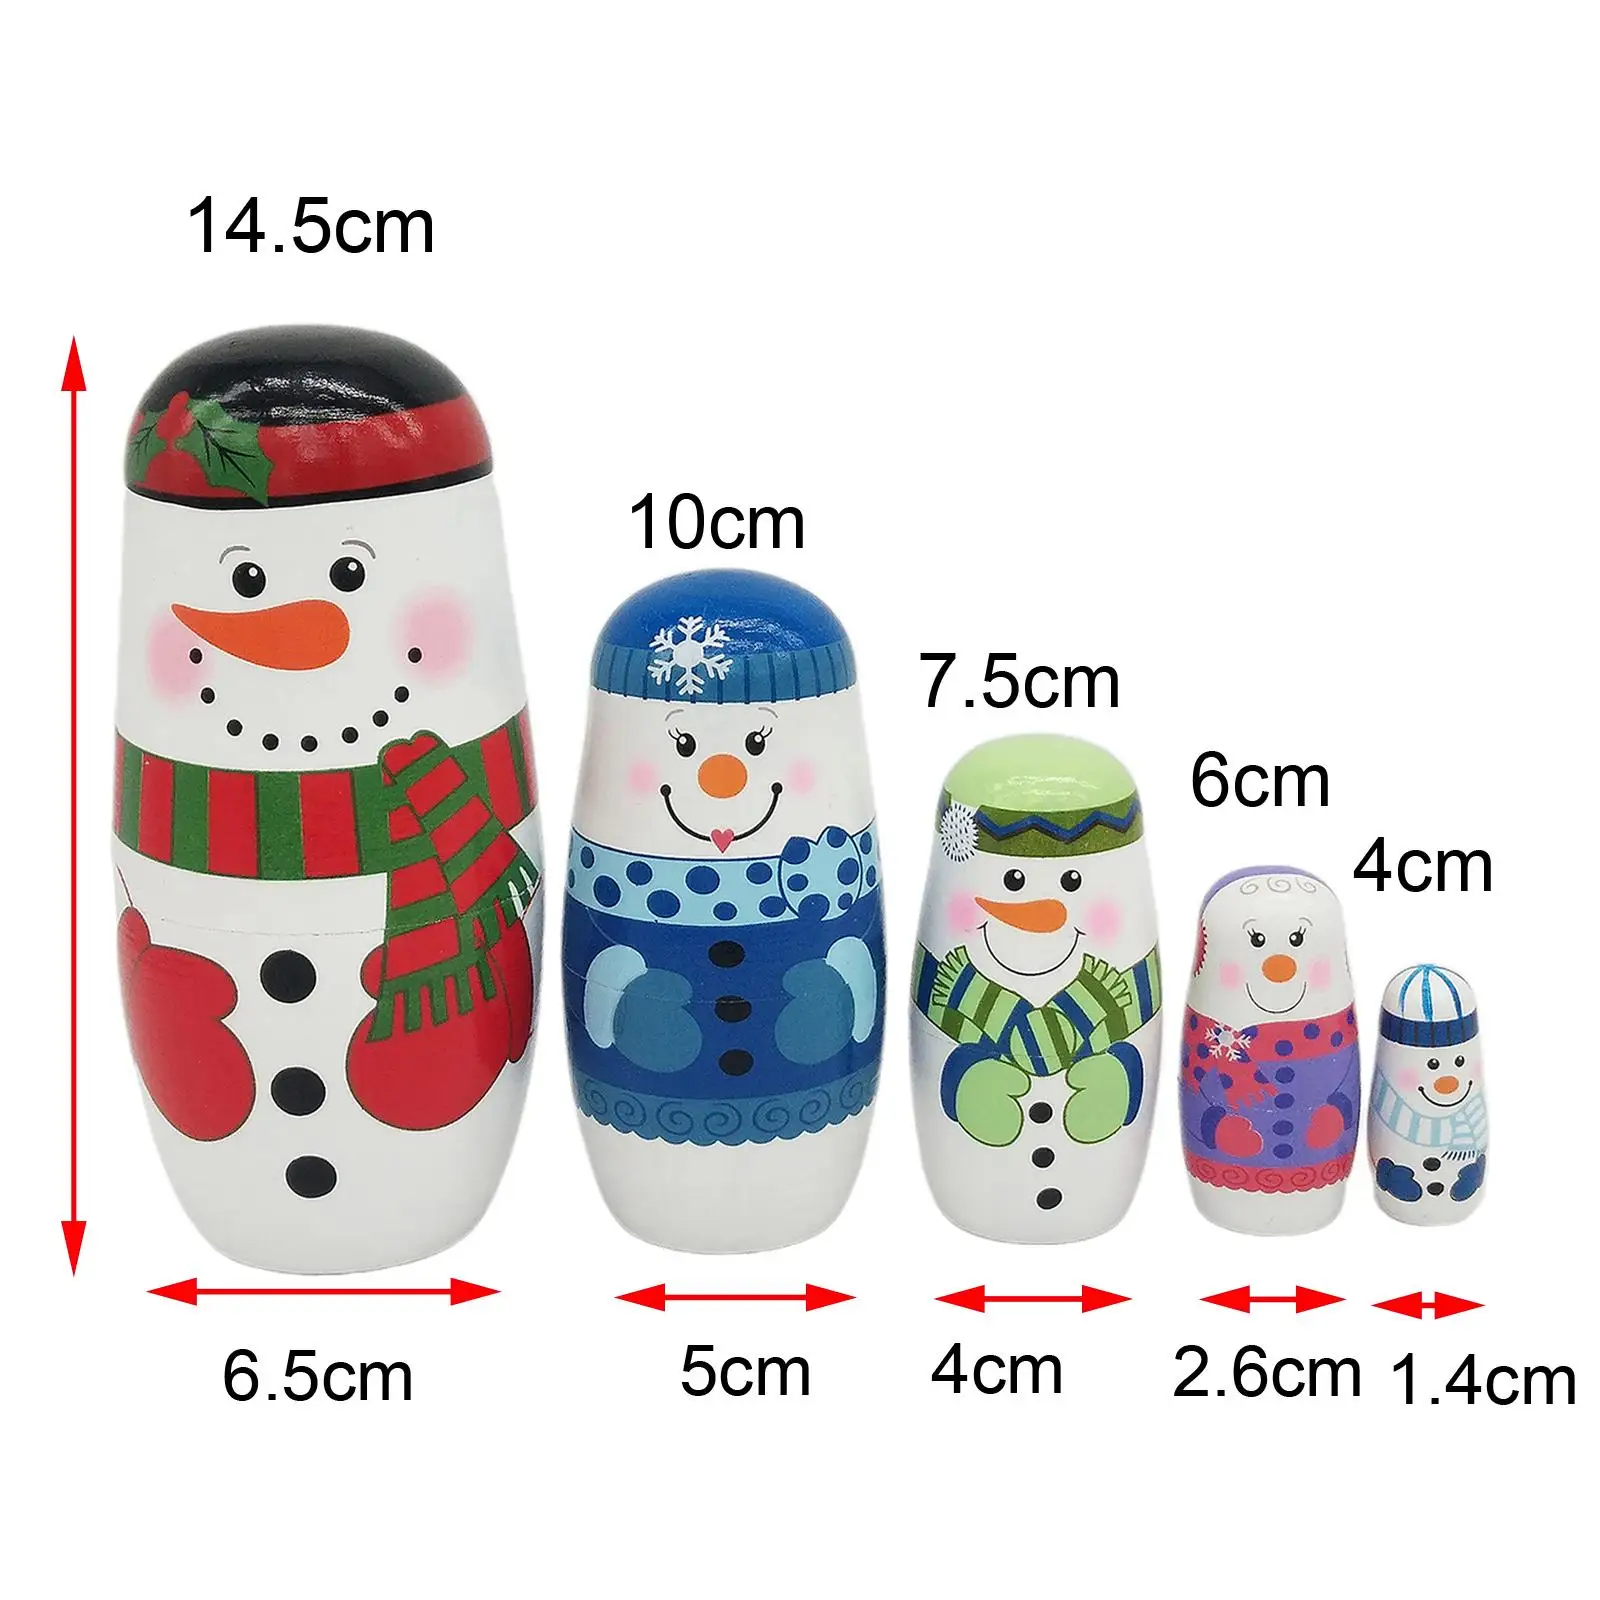 Wooden Russian Nesting Dolls 5 Layers Novelty Snowman Stacking Nested Handmade Toys for Children Christmas  Gift